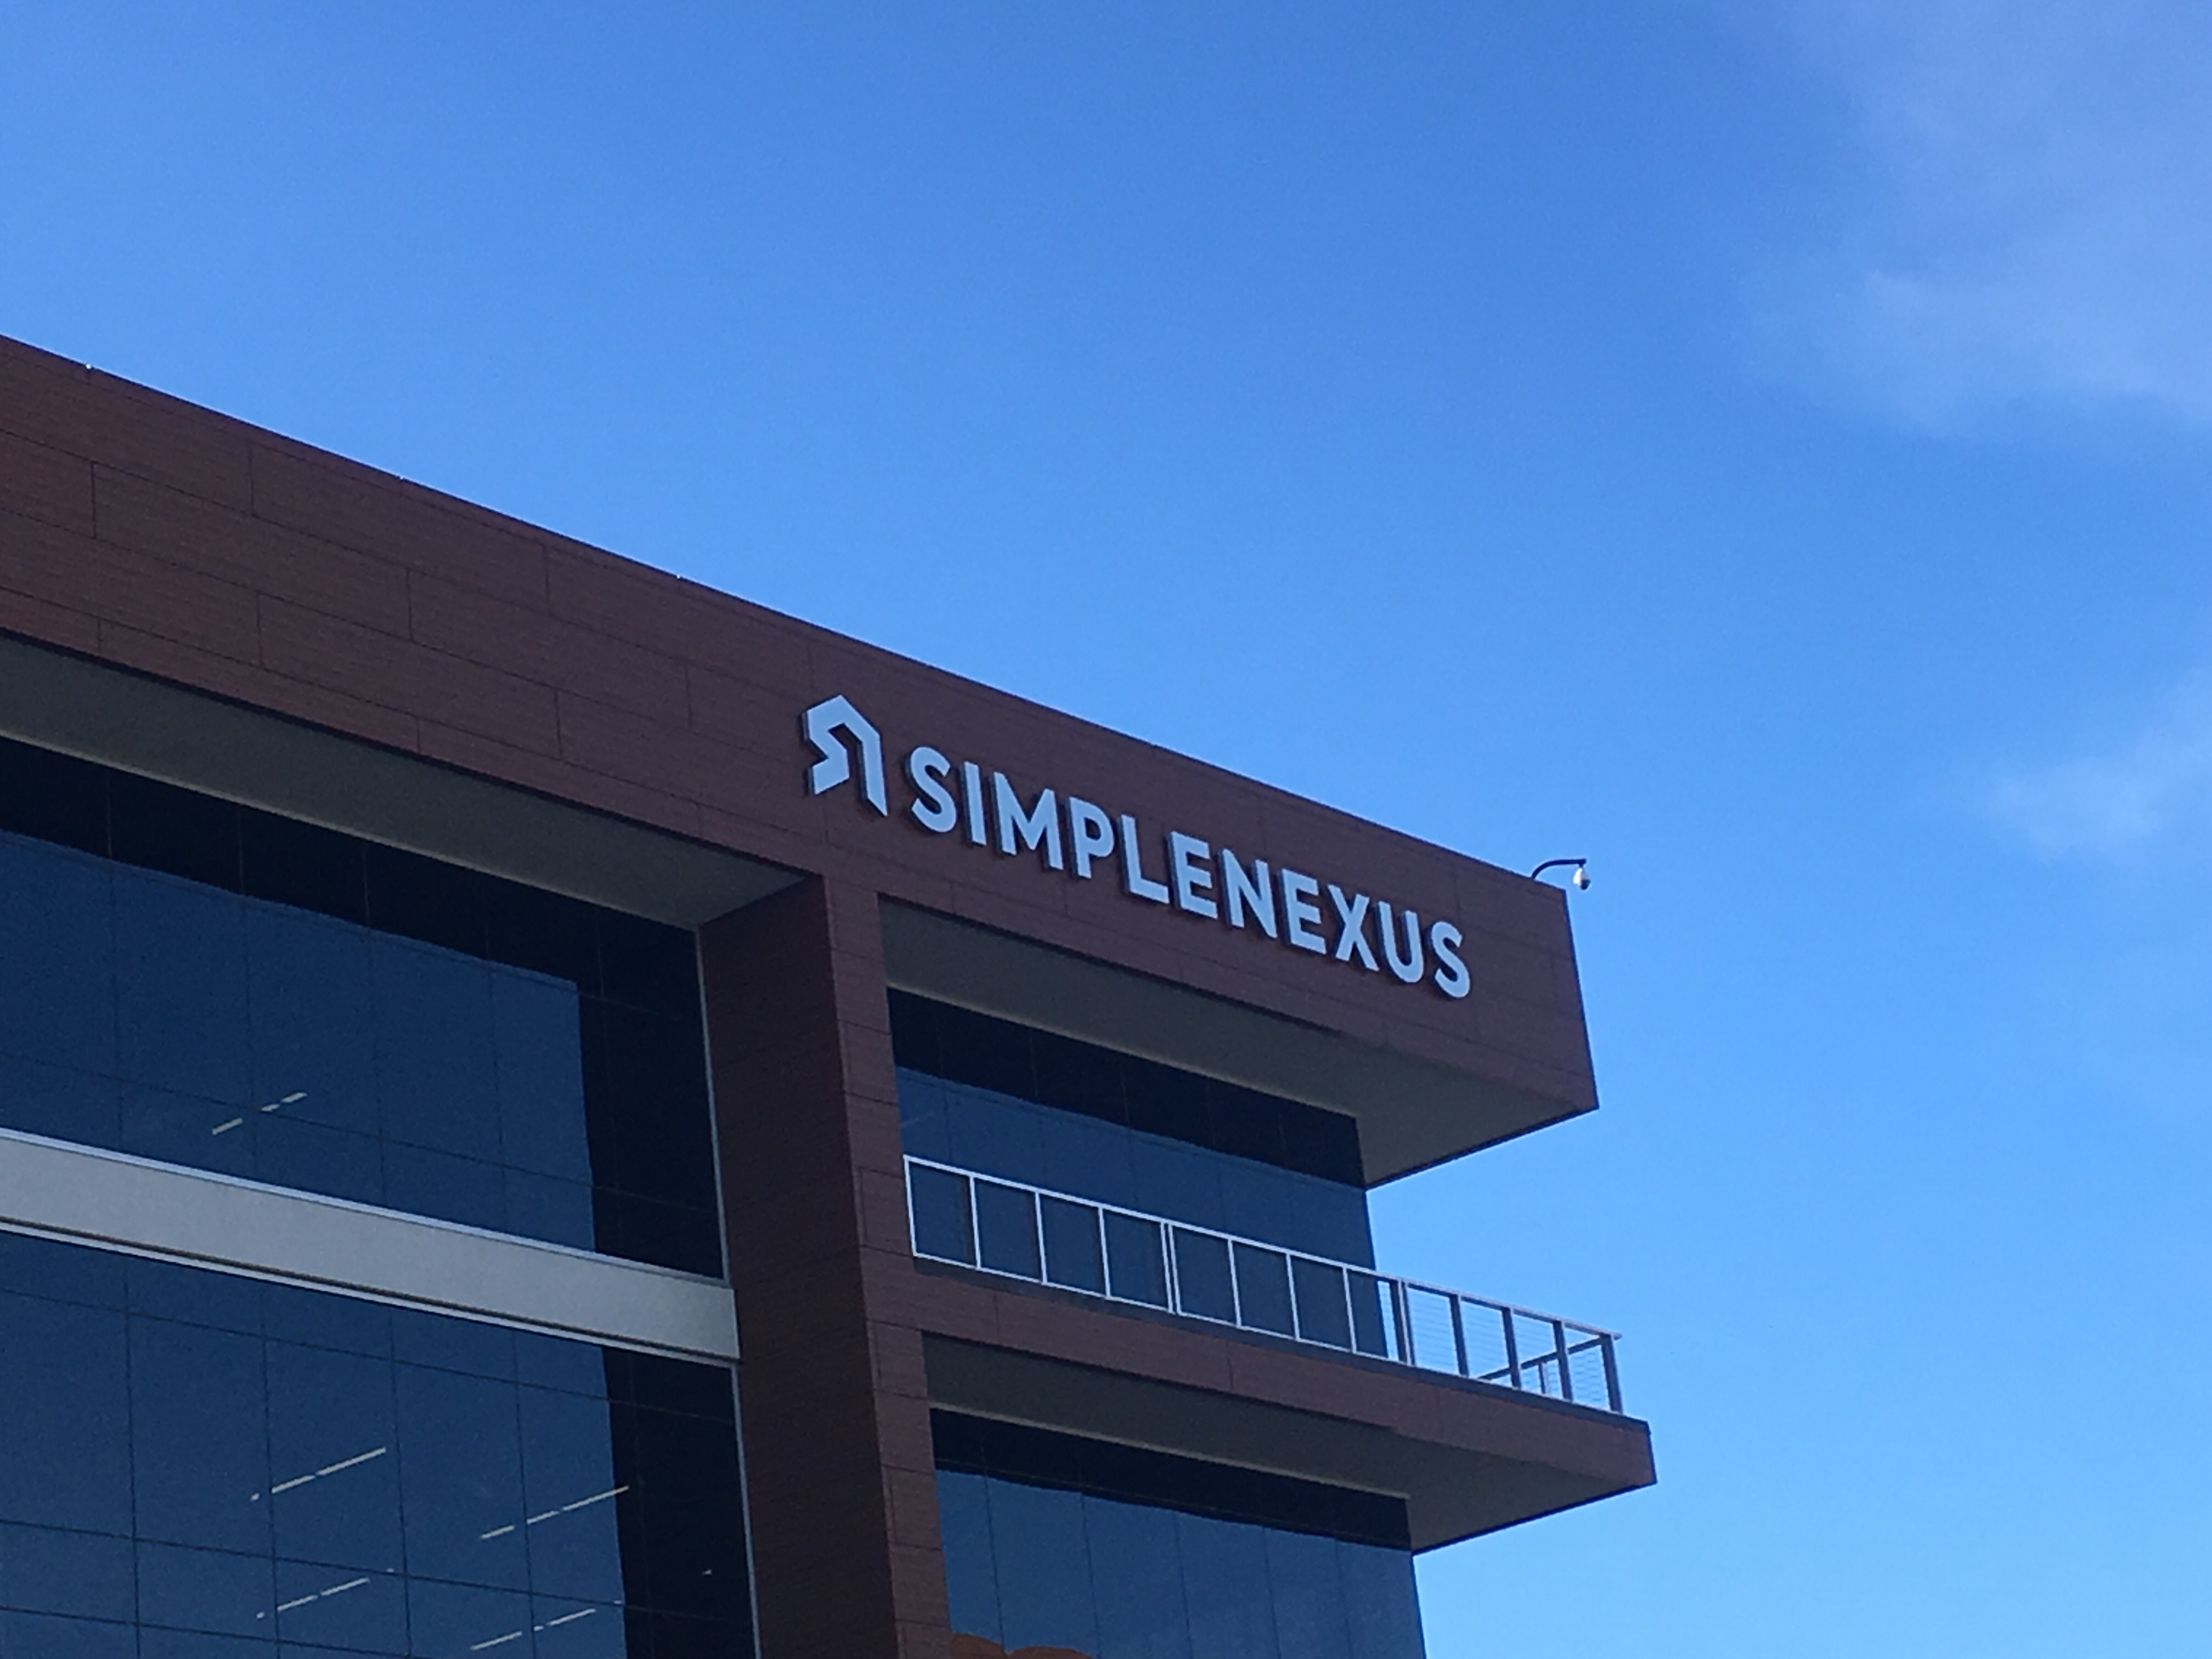 SimpleNexus office building with name on side.